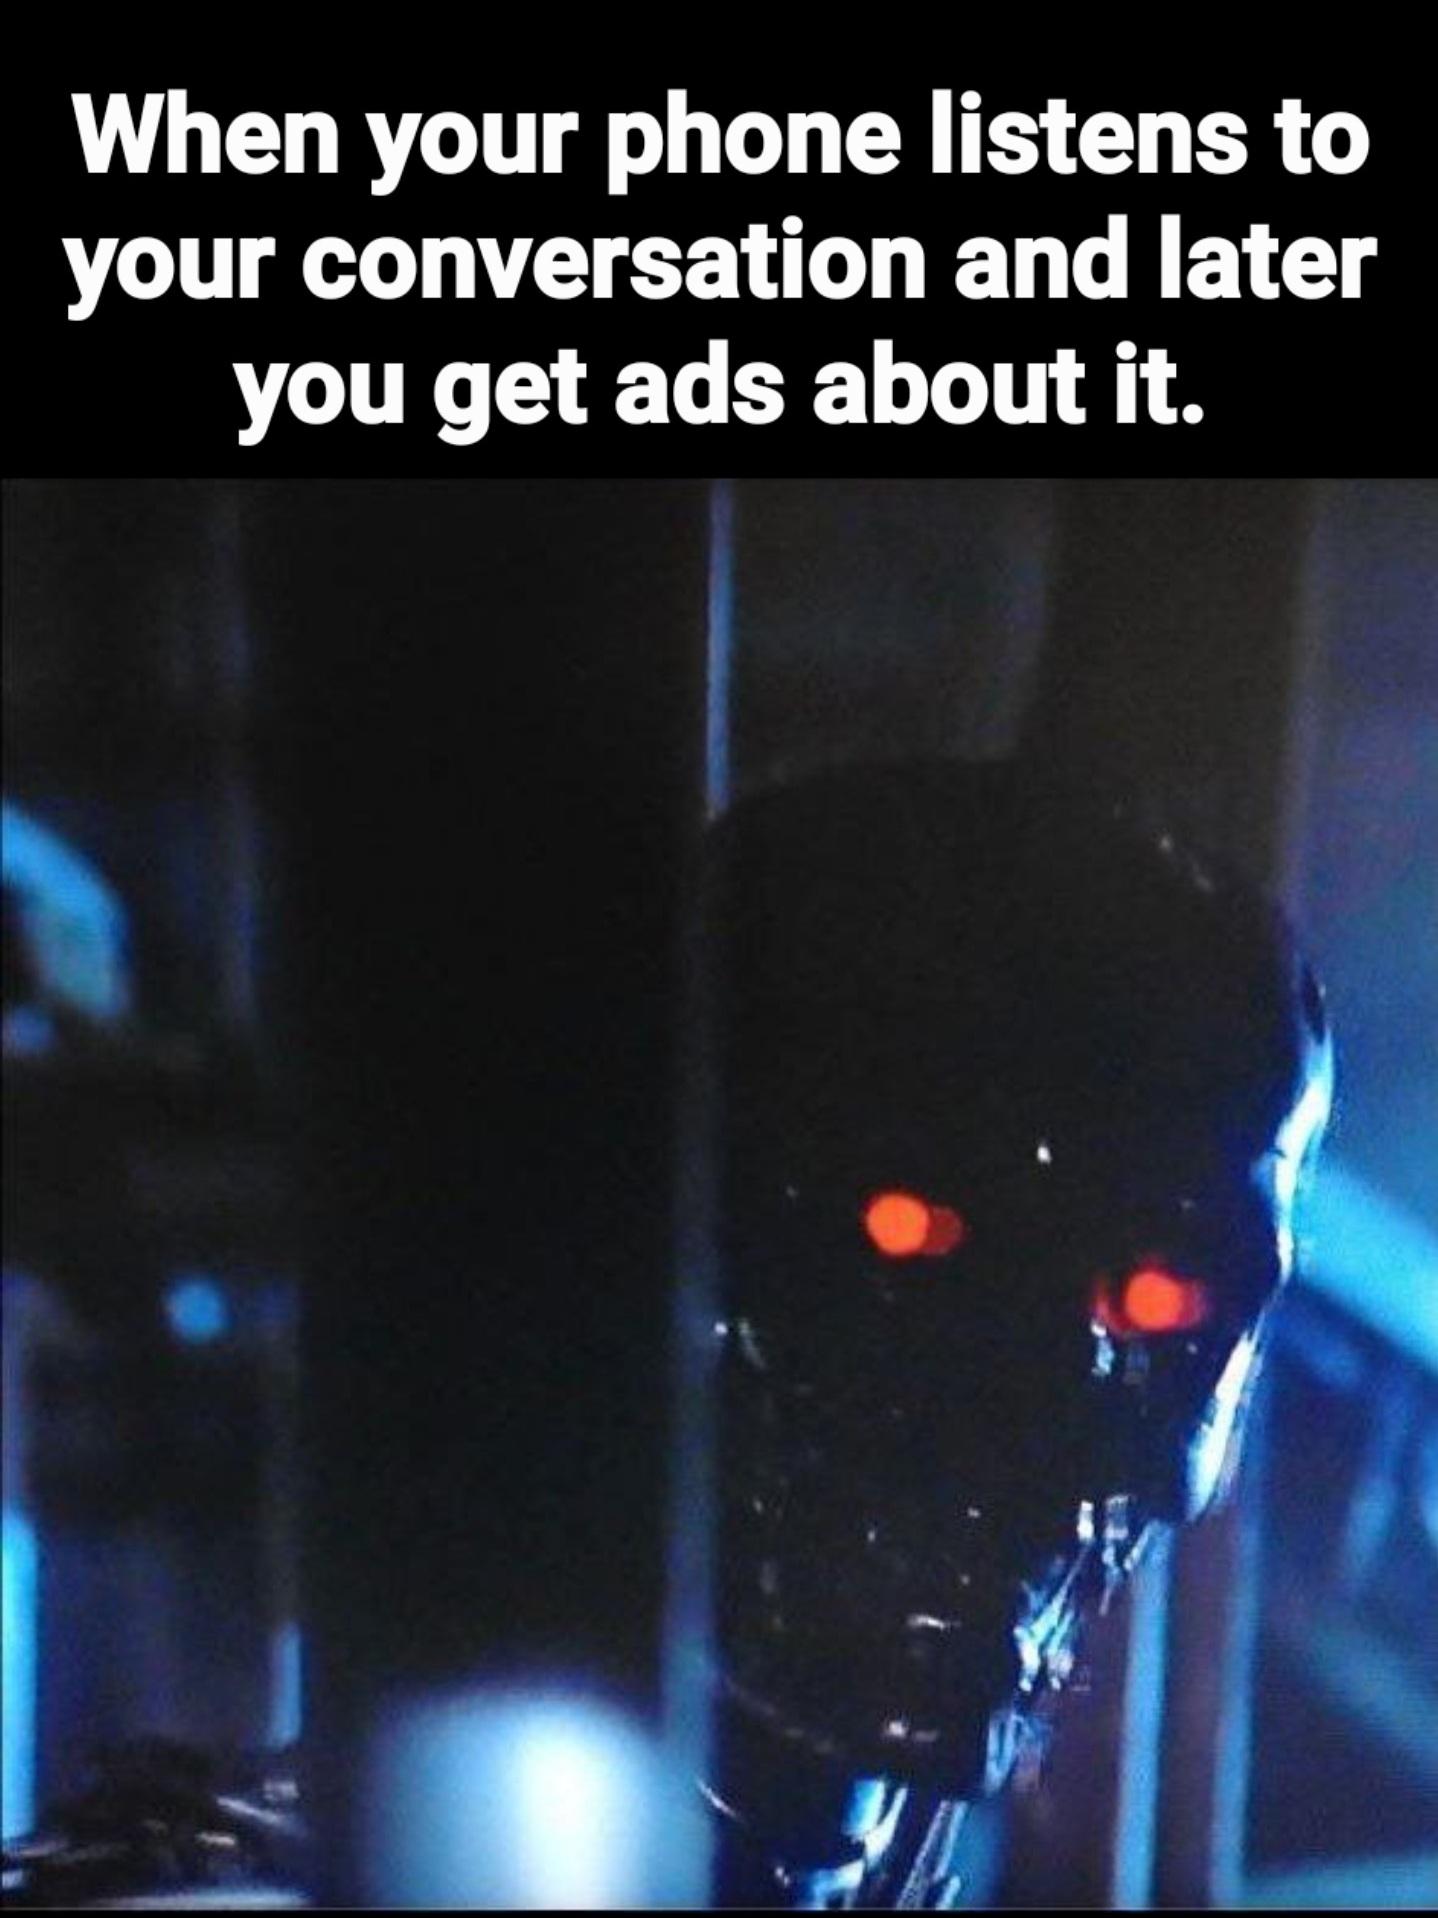 dank memes - funny memes - phones 4 u - When your phone listens to your conversation and later you get ads about it.